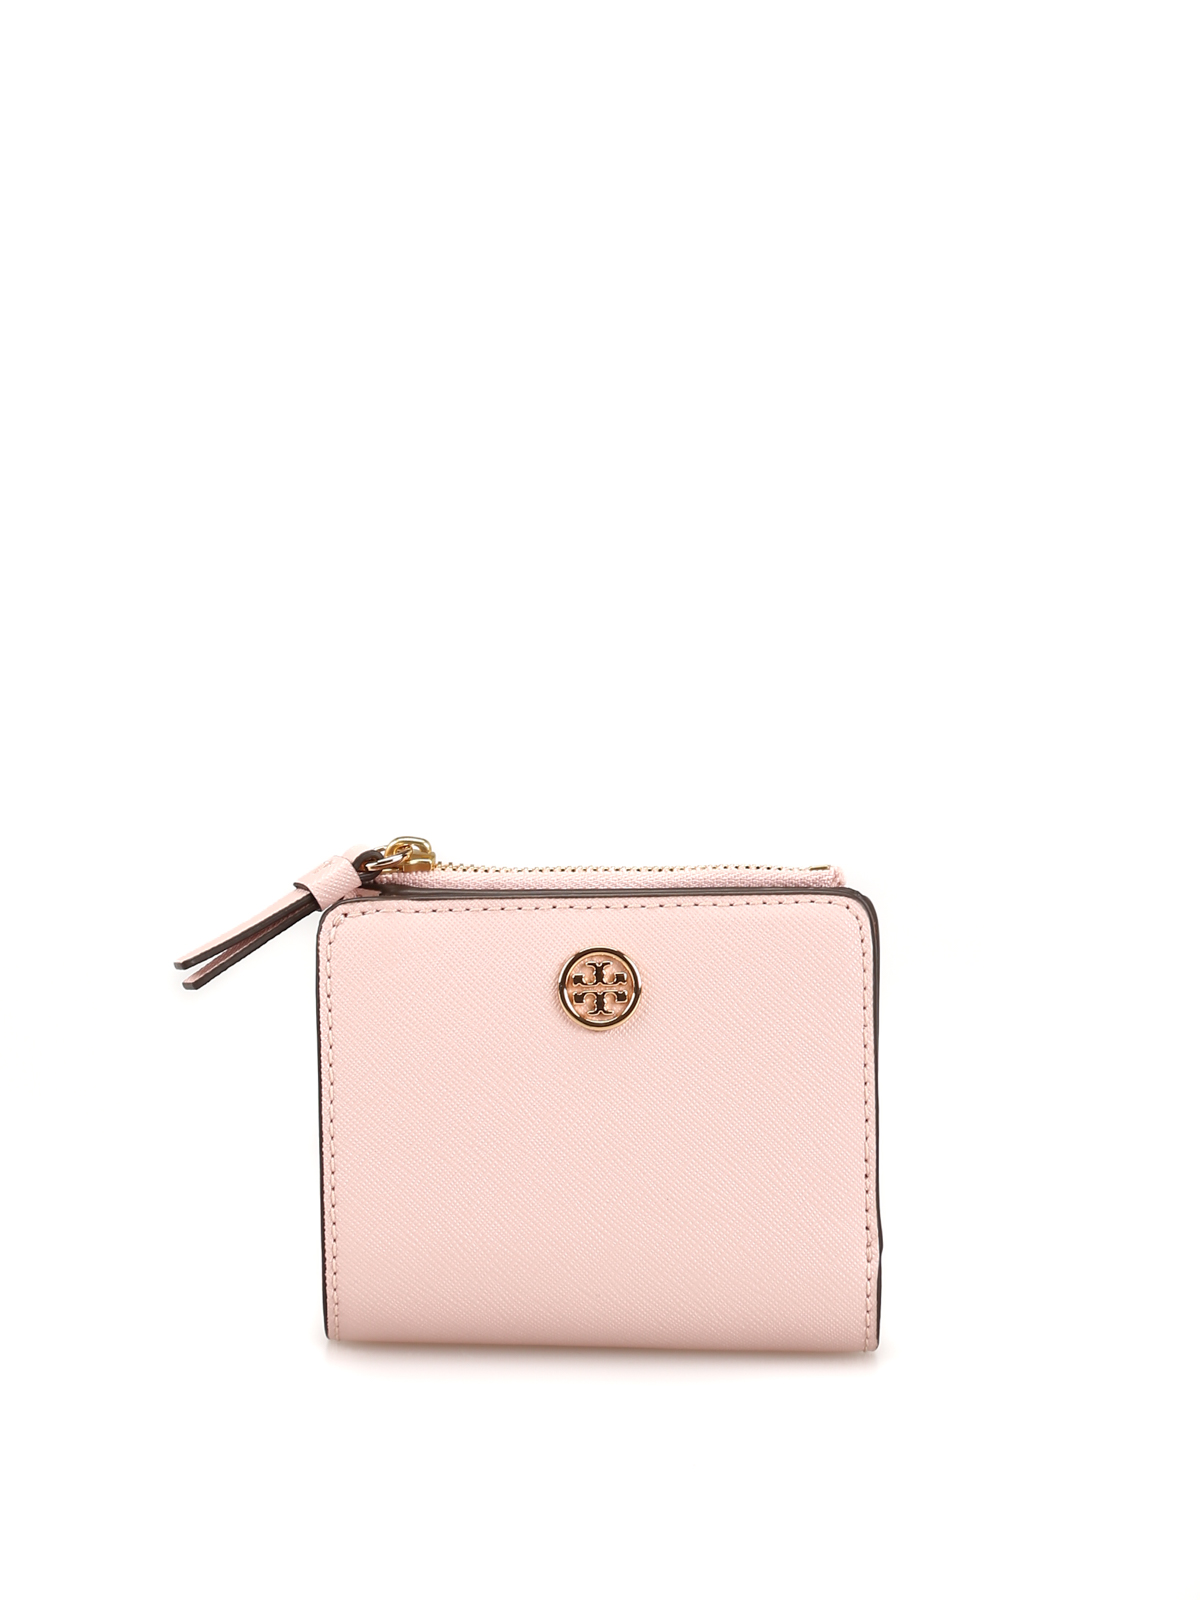 Tory Burch Robinson Small Tote Light Pink